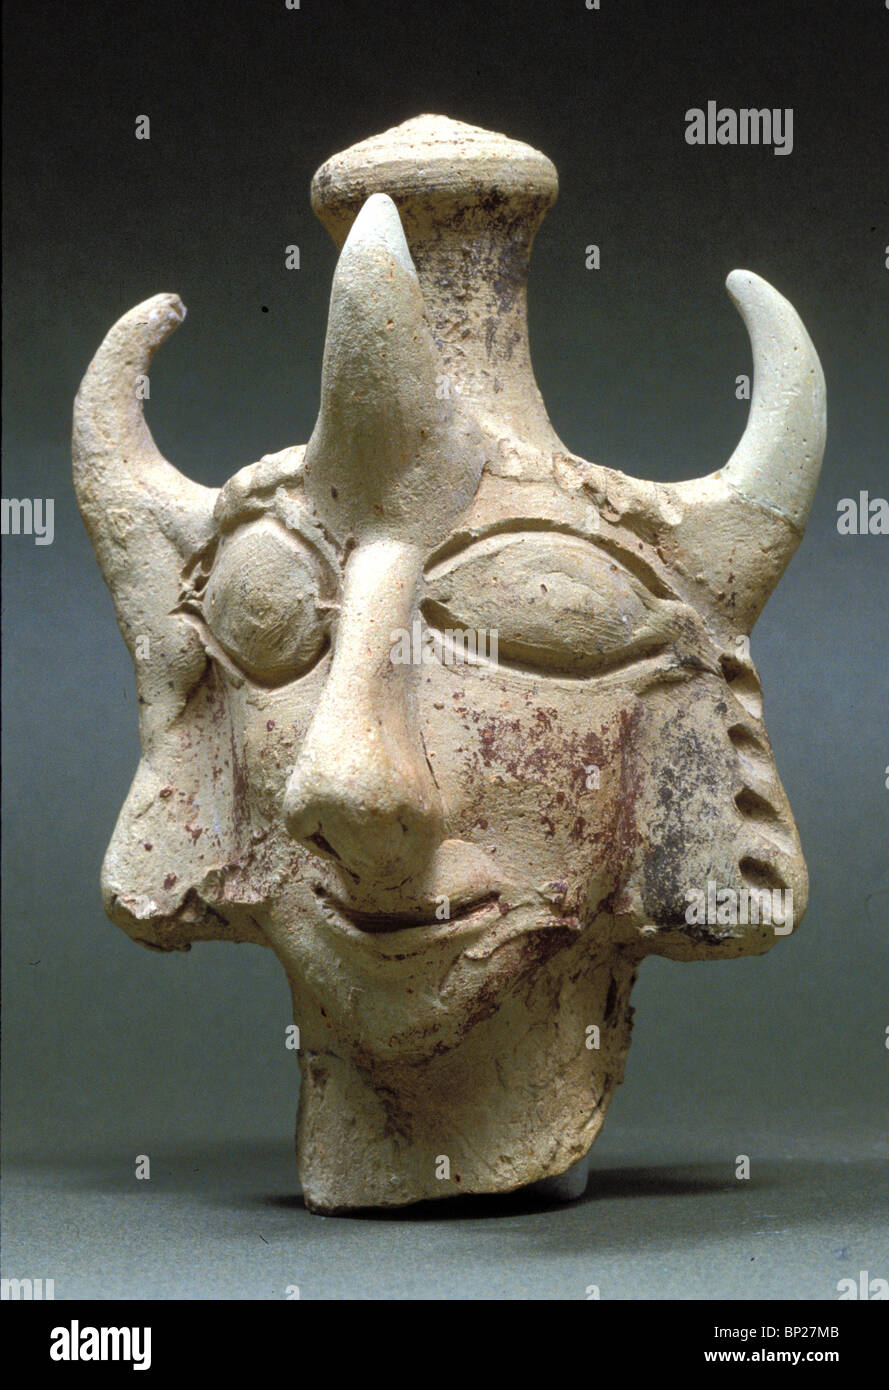 922 - HORNED GODDESS FOUND IN AN EDOMITE SHRINE IN HURBAT QUITMIT, EASTERN NEGEV, DATING FROM THE 7 - 6TH. C. B.C. Stock Photo